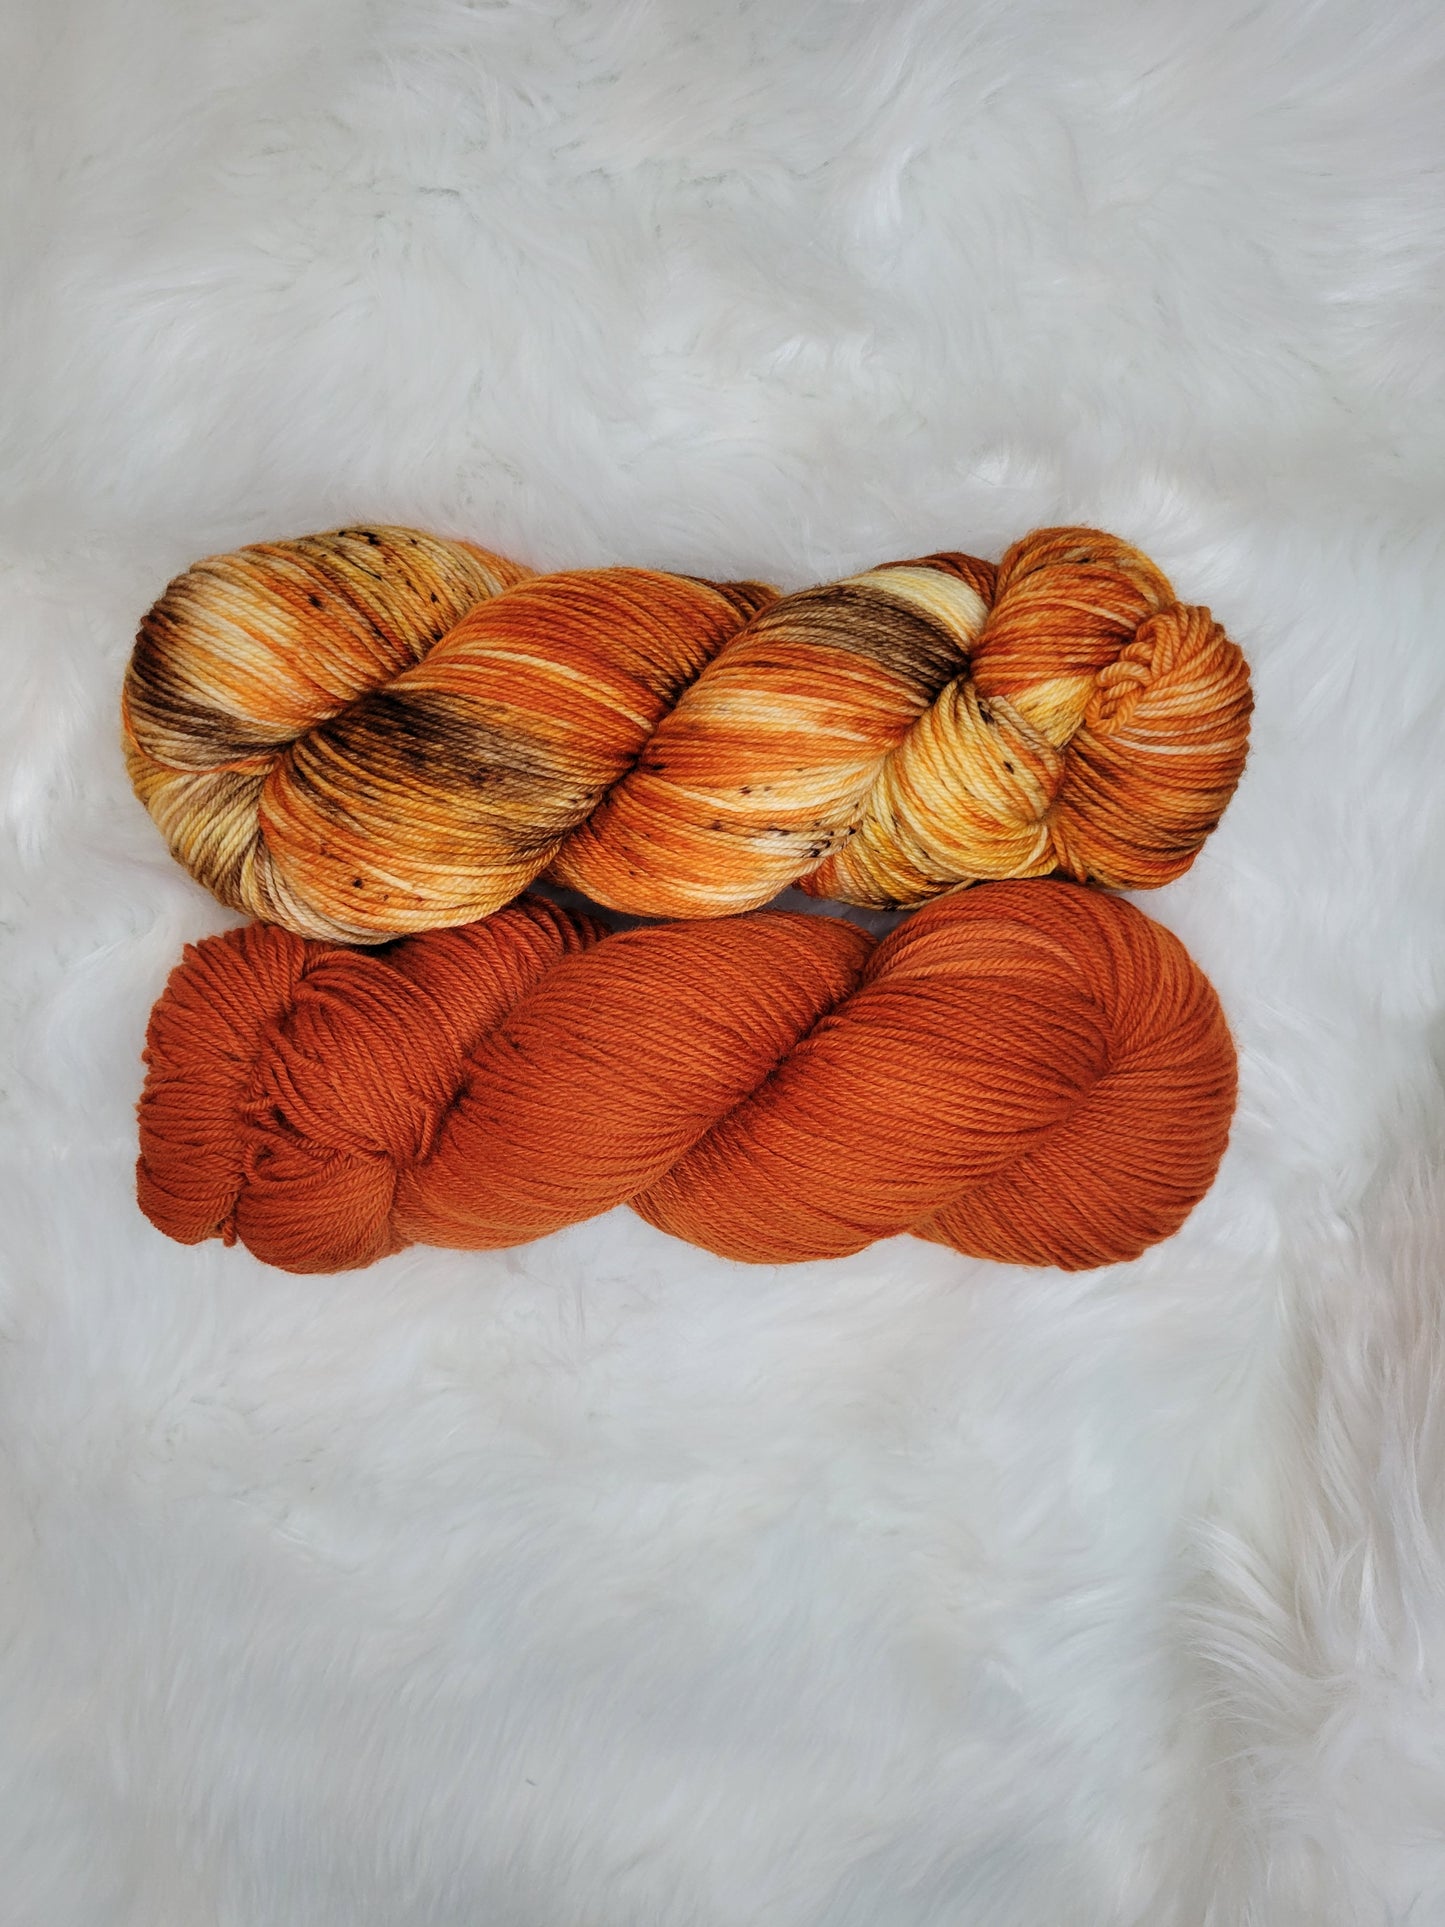 Hand Dyed Yarn - Game of Thrones Sock Set - 120g